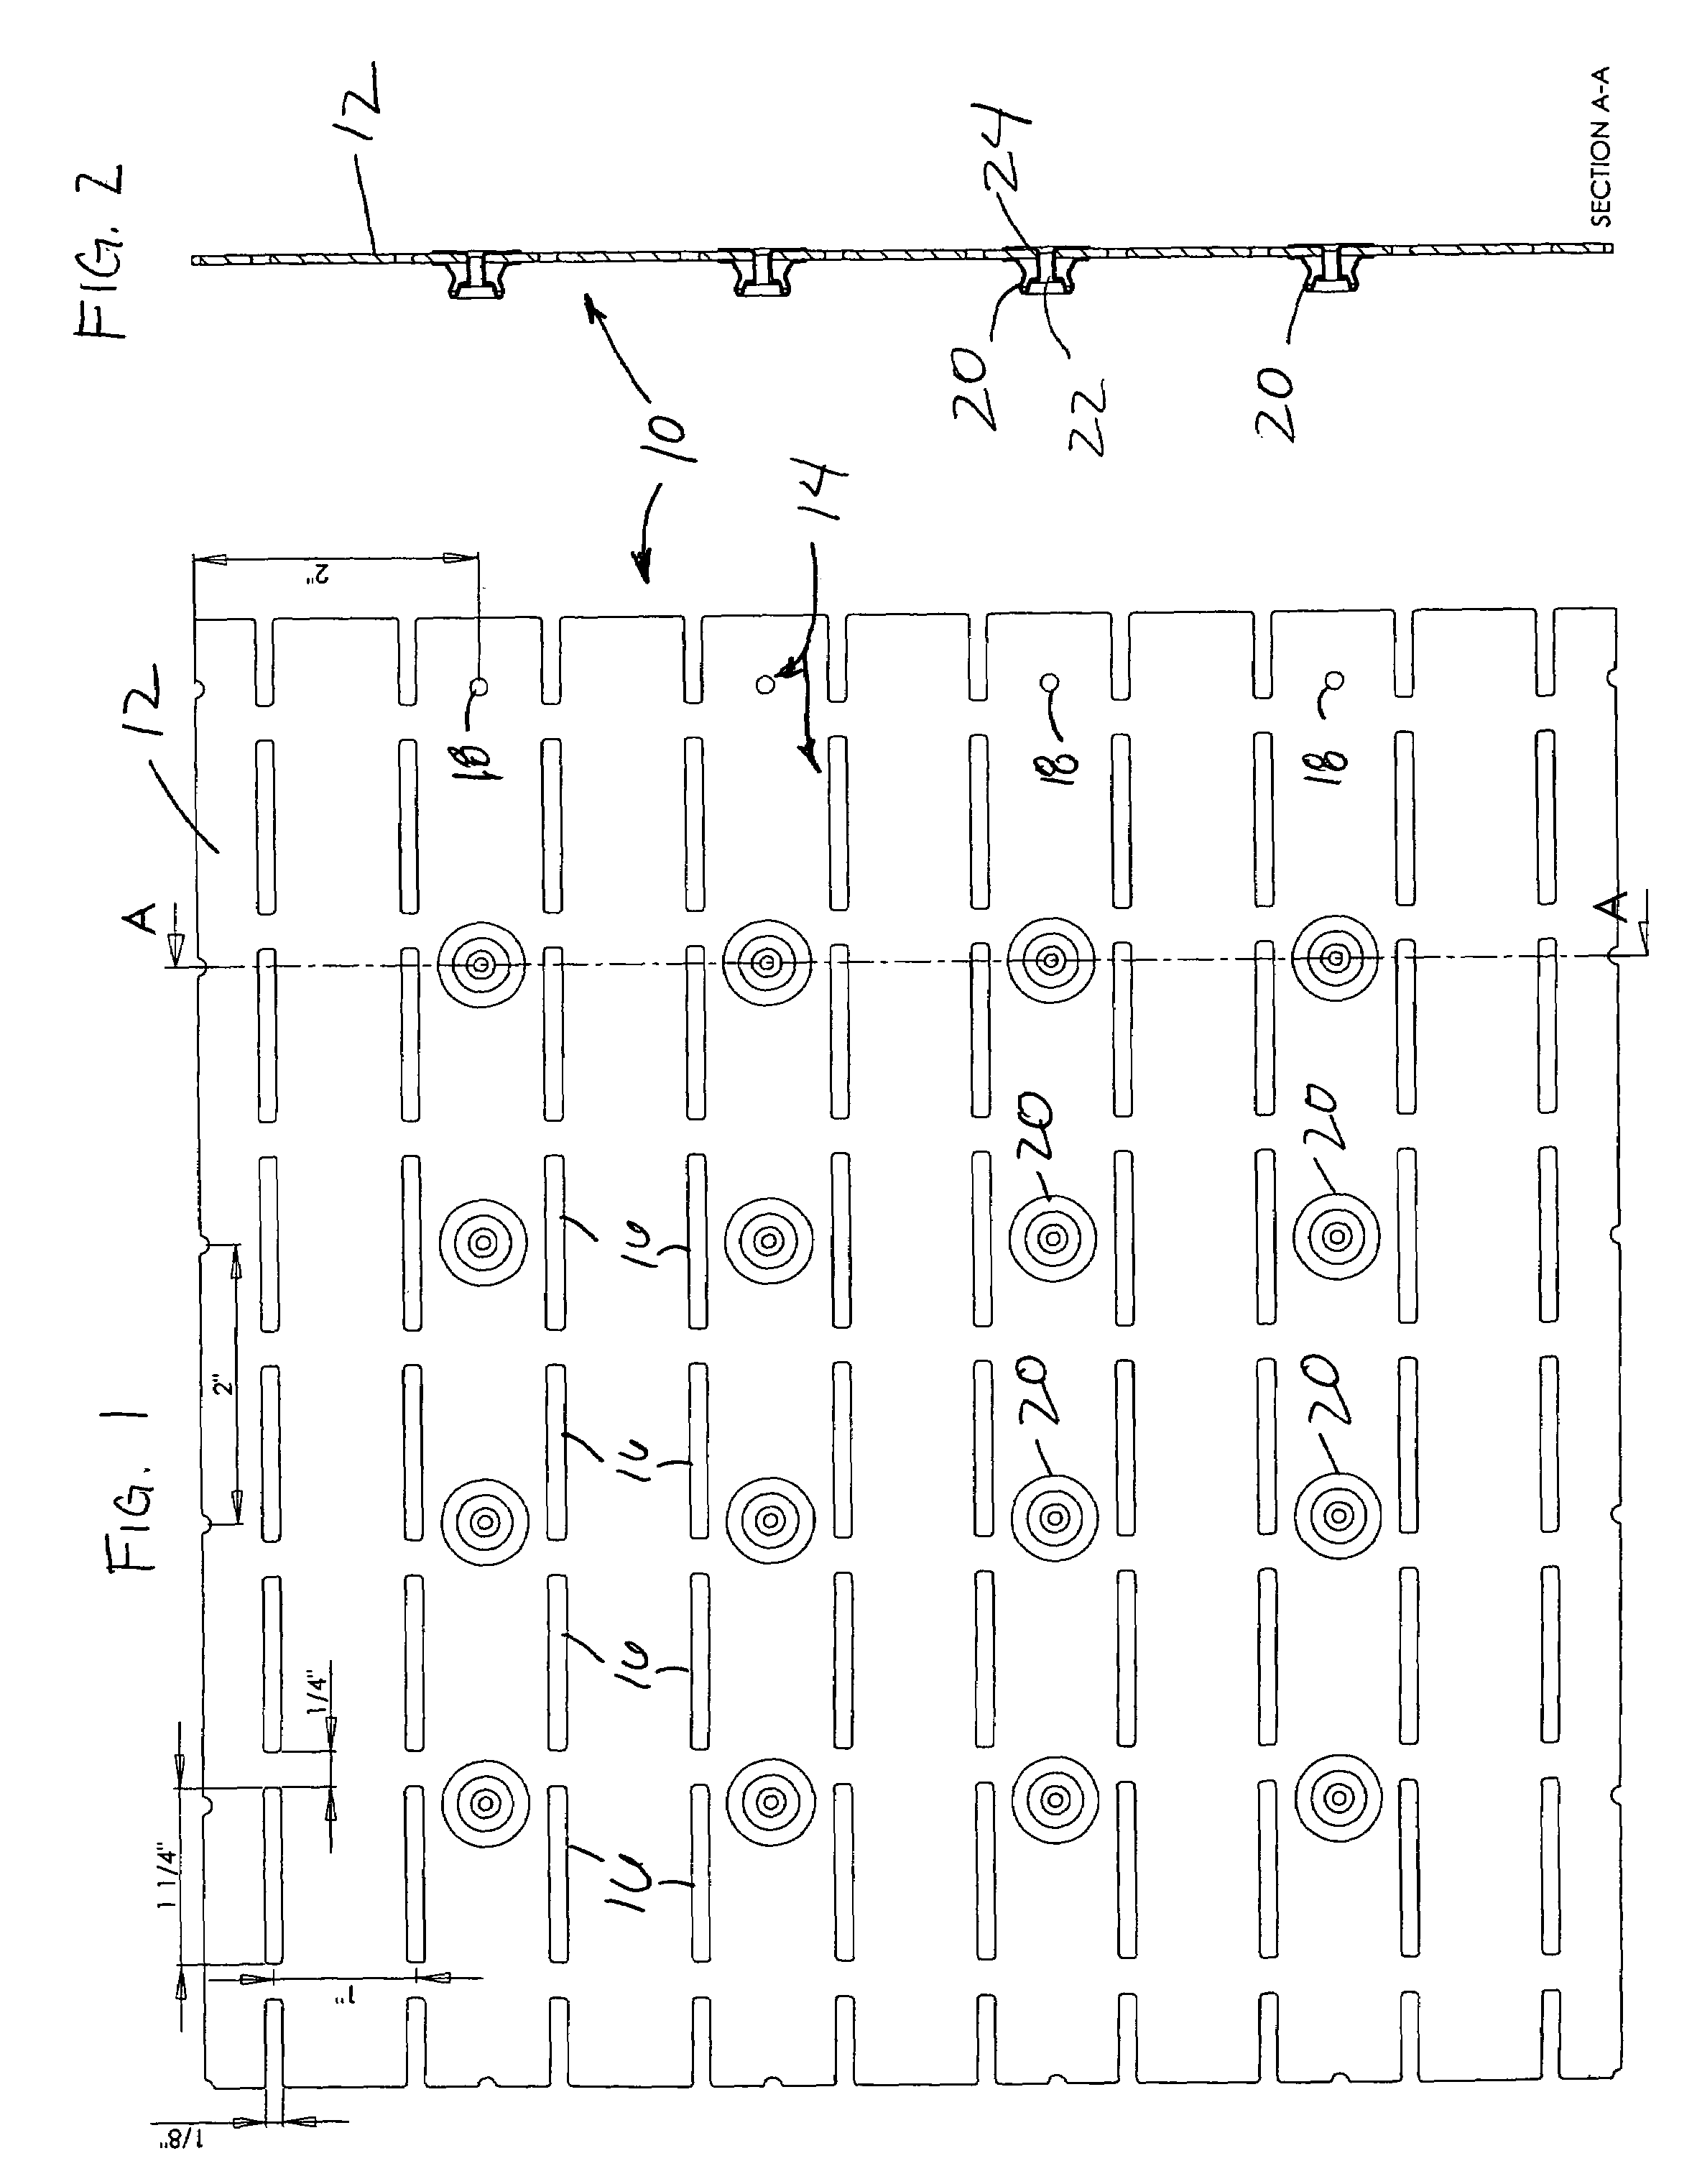 Fabric for load bearing vests having a pocket fastening system